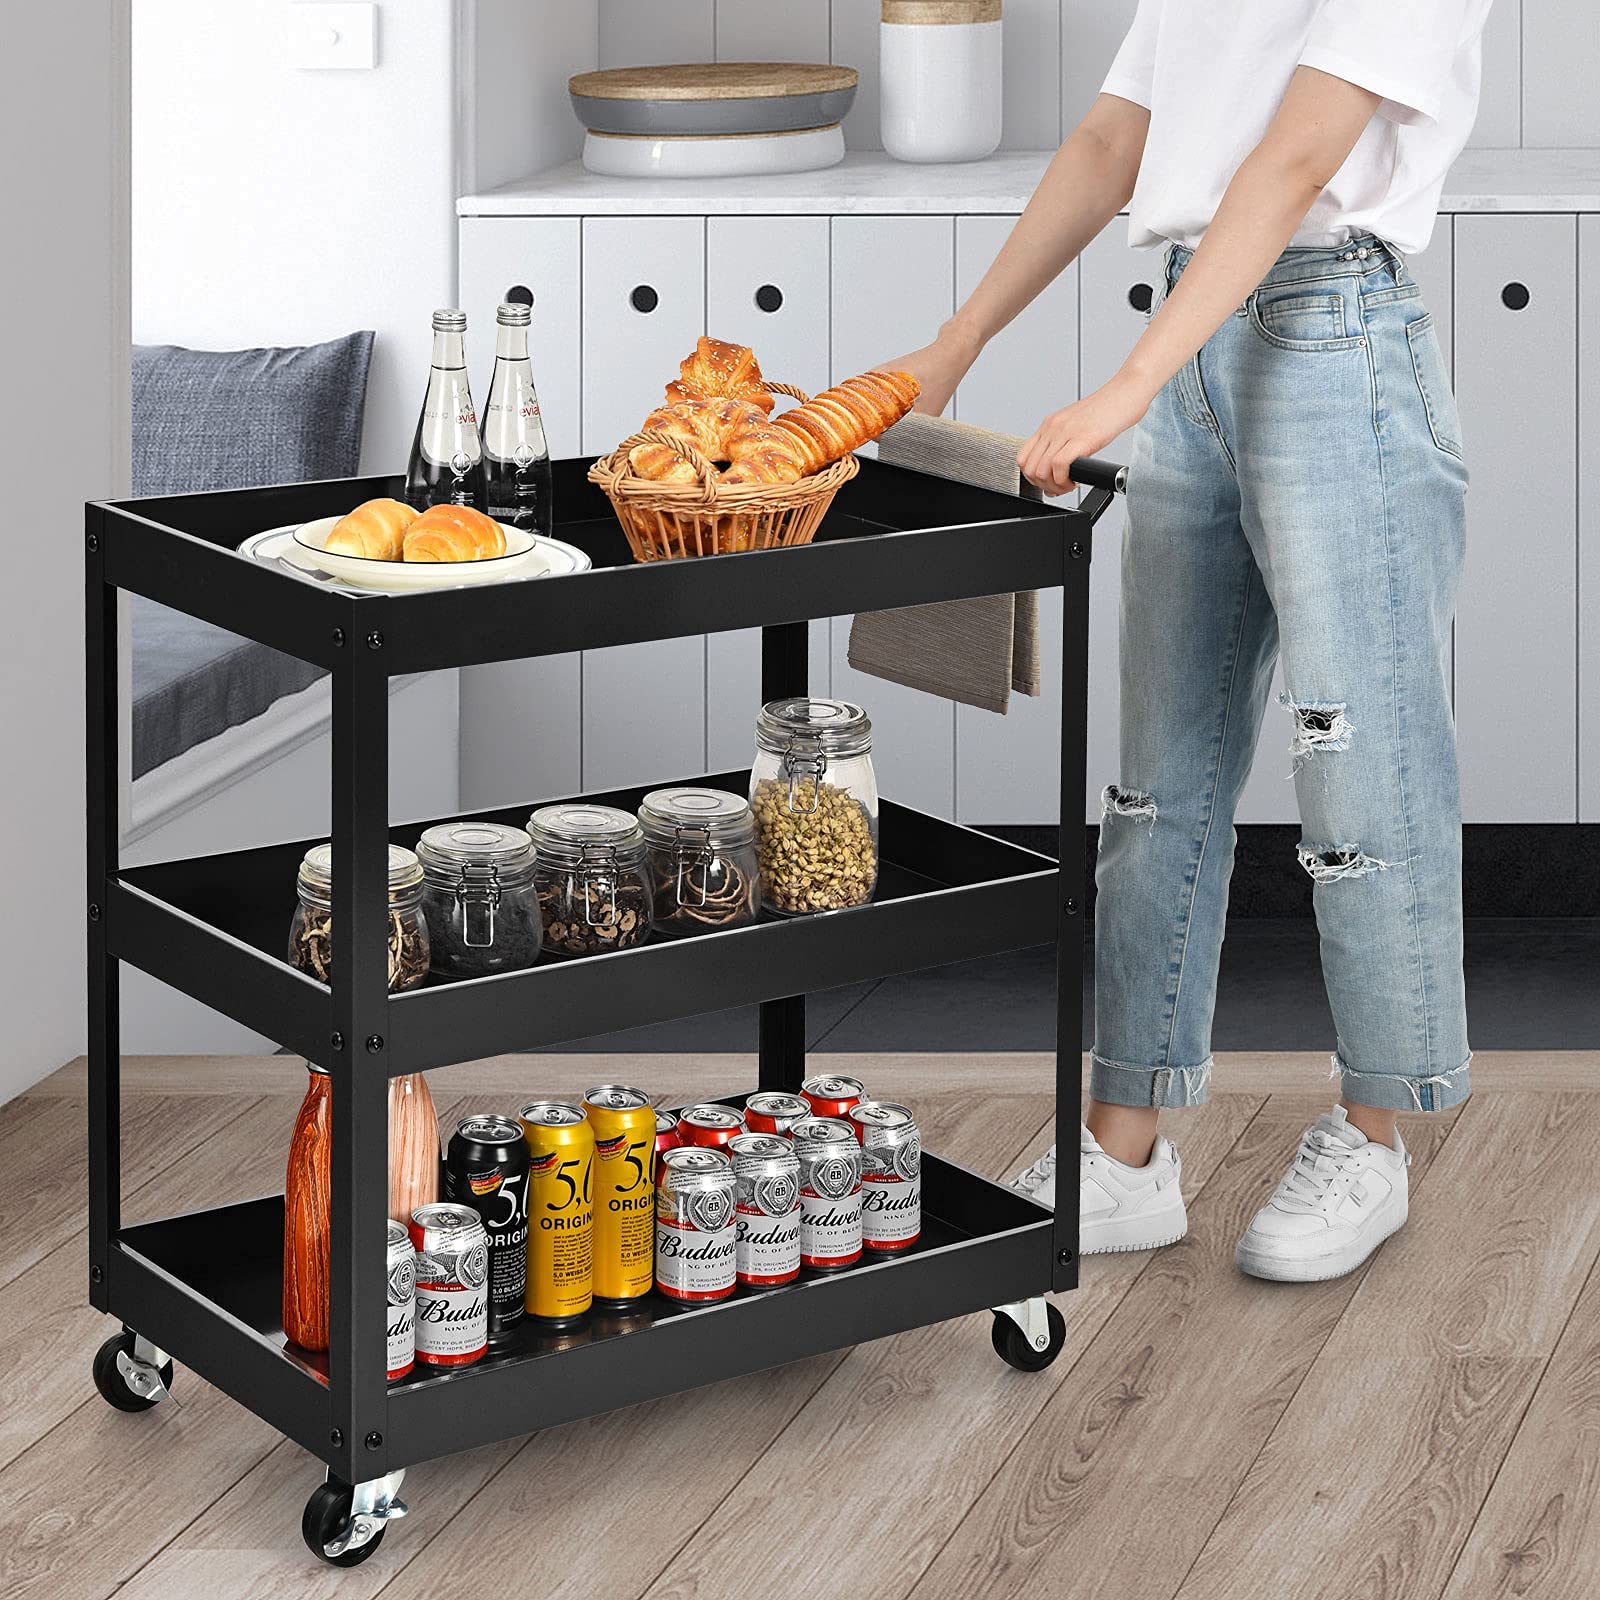 Goplus 2-Tier Utility Cart, Heavy Duty Commercial Service Tool Cart w/Handle, 110 lbs Max Support per Tier, Rolling Mechanic Metal Tool Cart Storage Organizer for Home, Garage, Warehouse